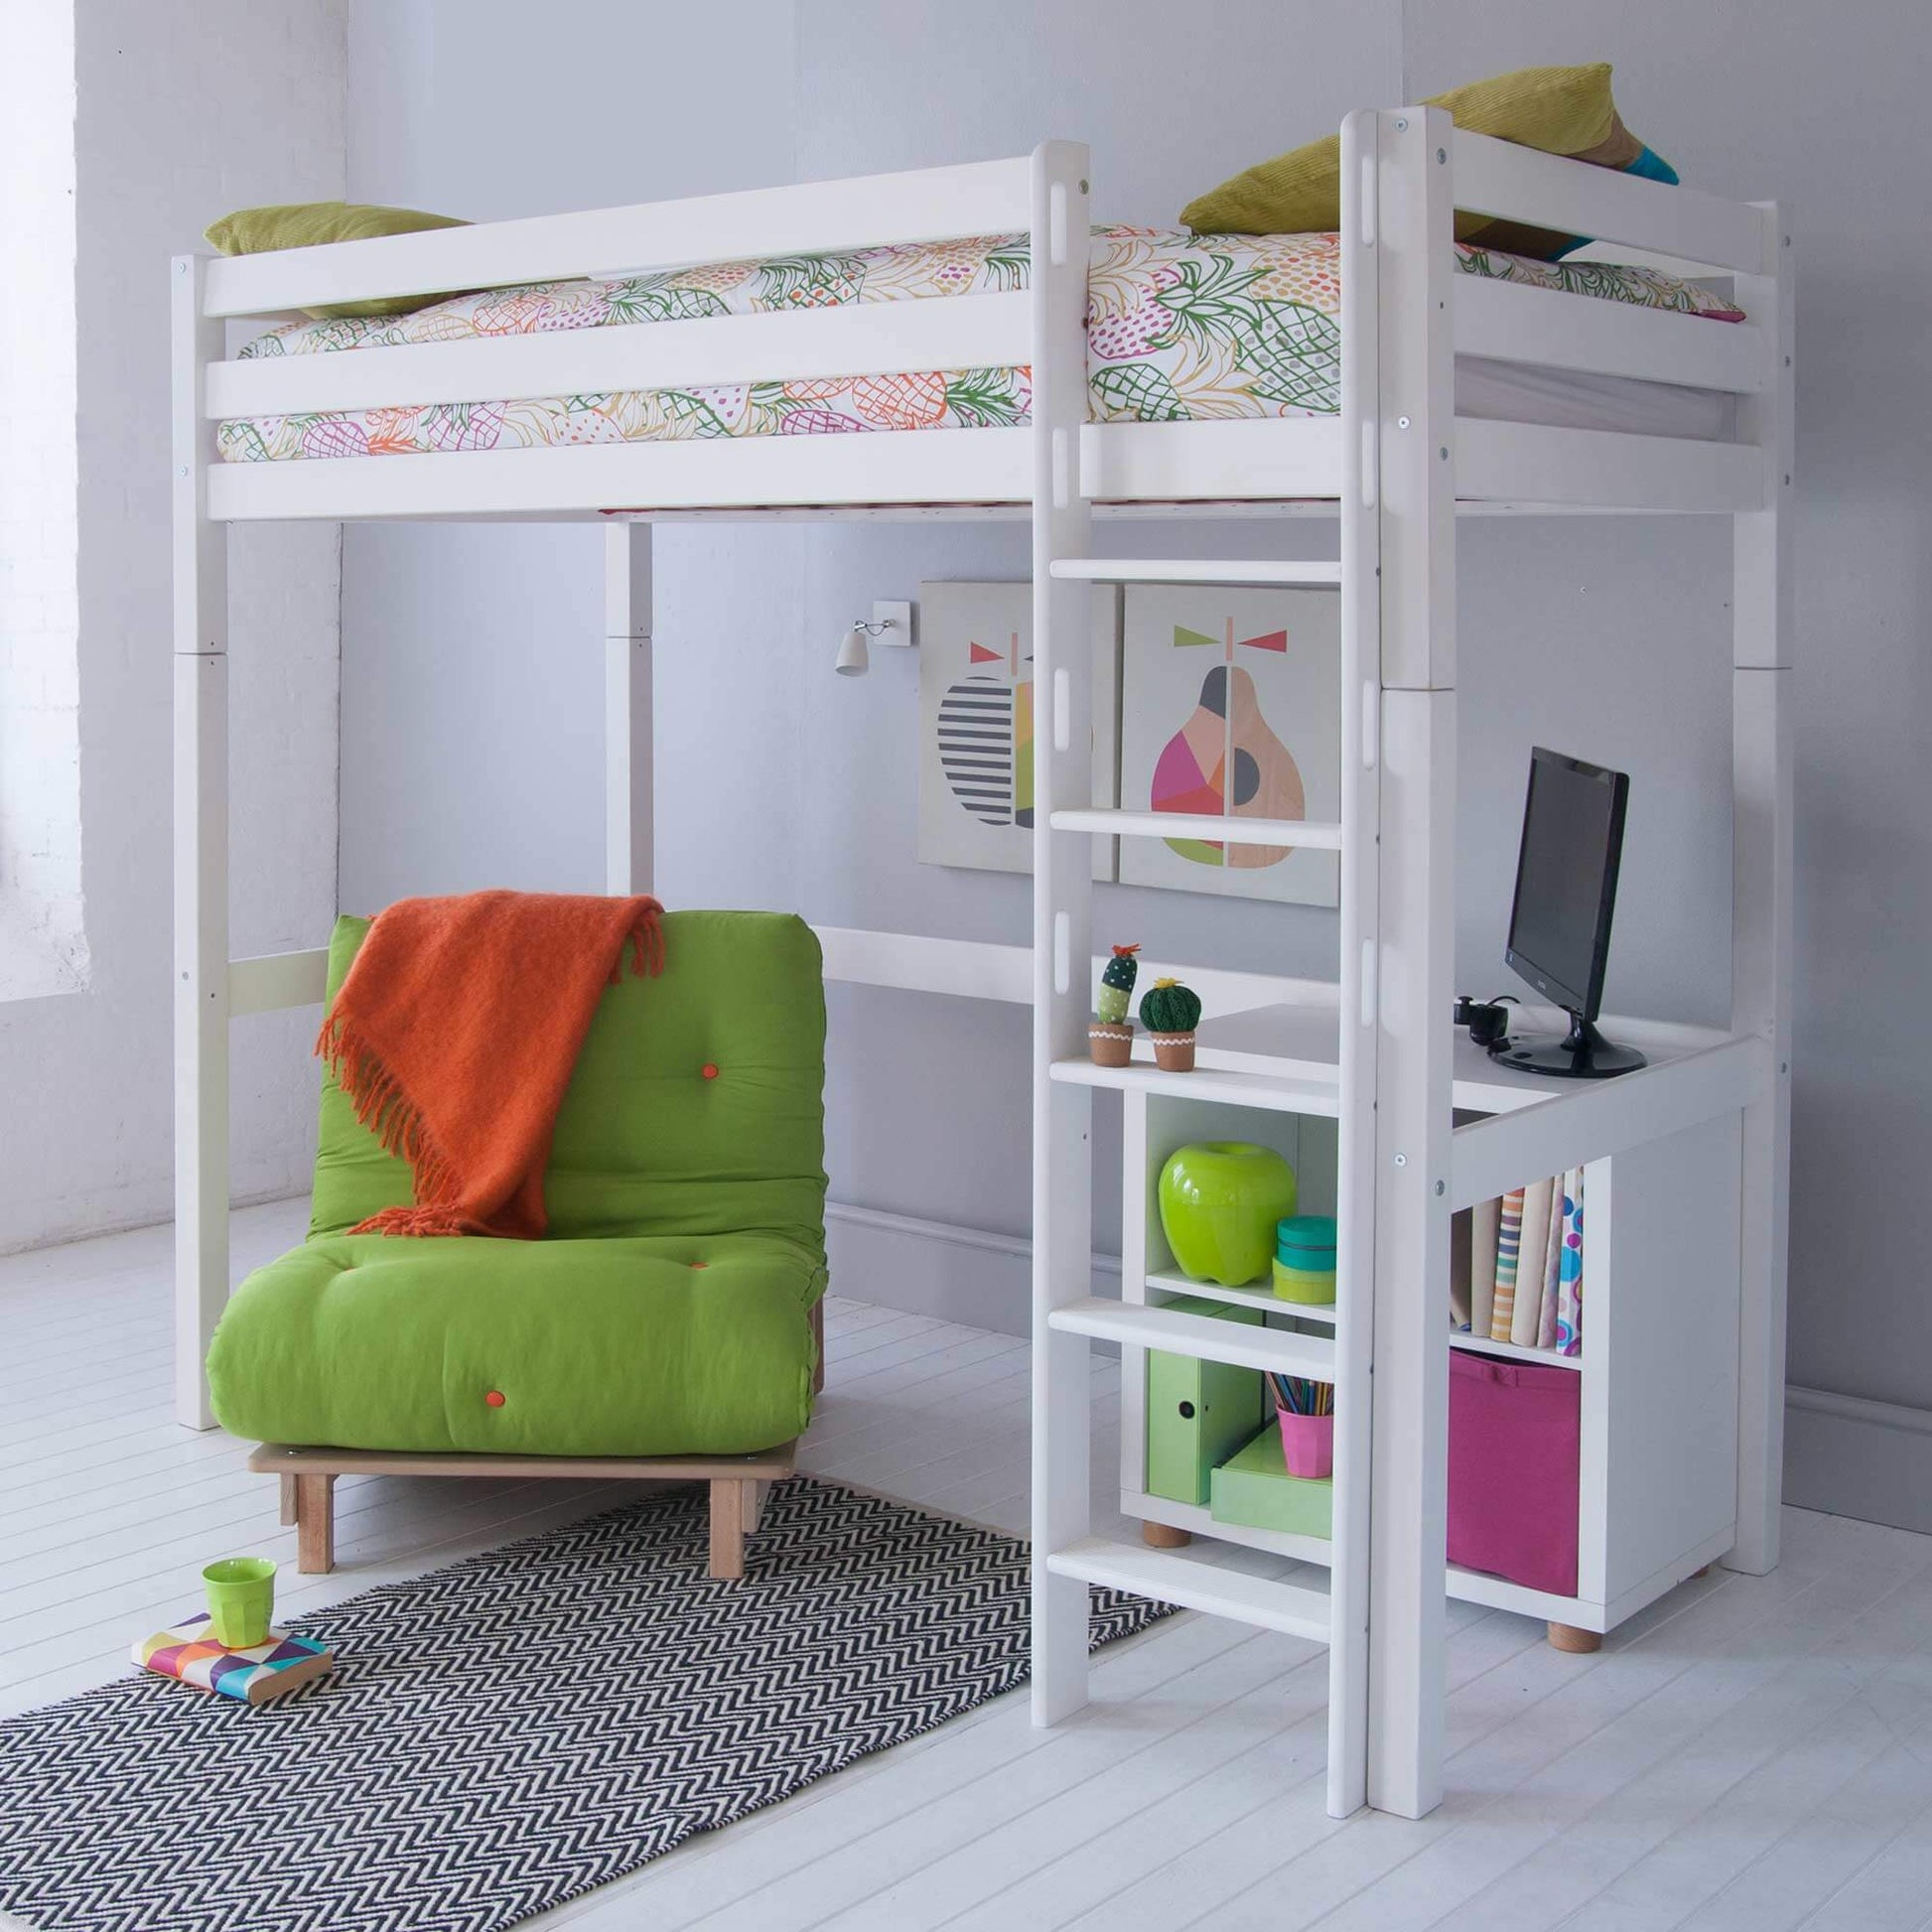 Classic Beech High Sleeper with Green Futon Chair Bed & Bookcase